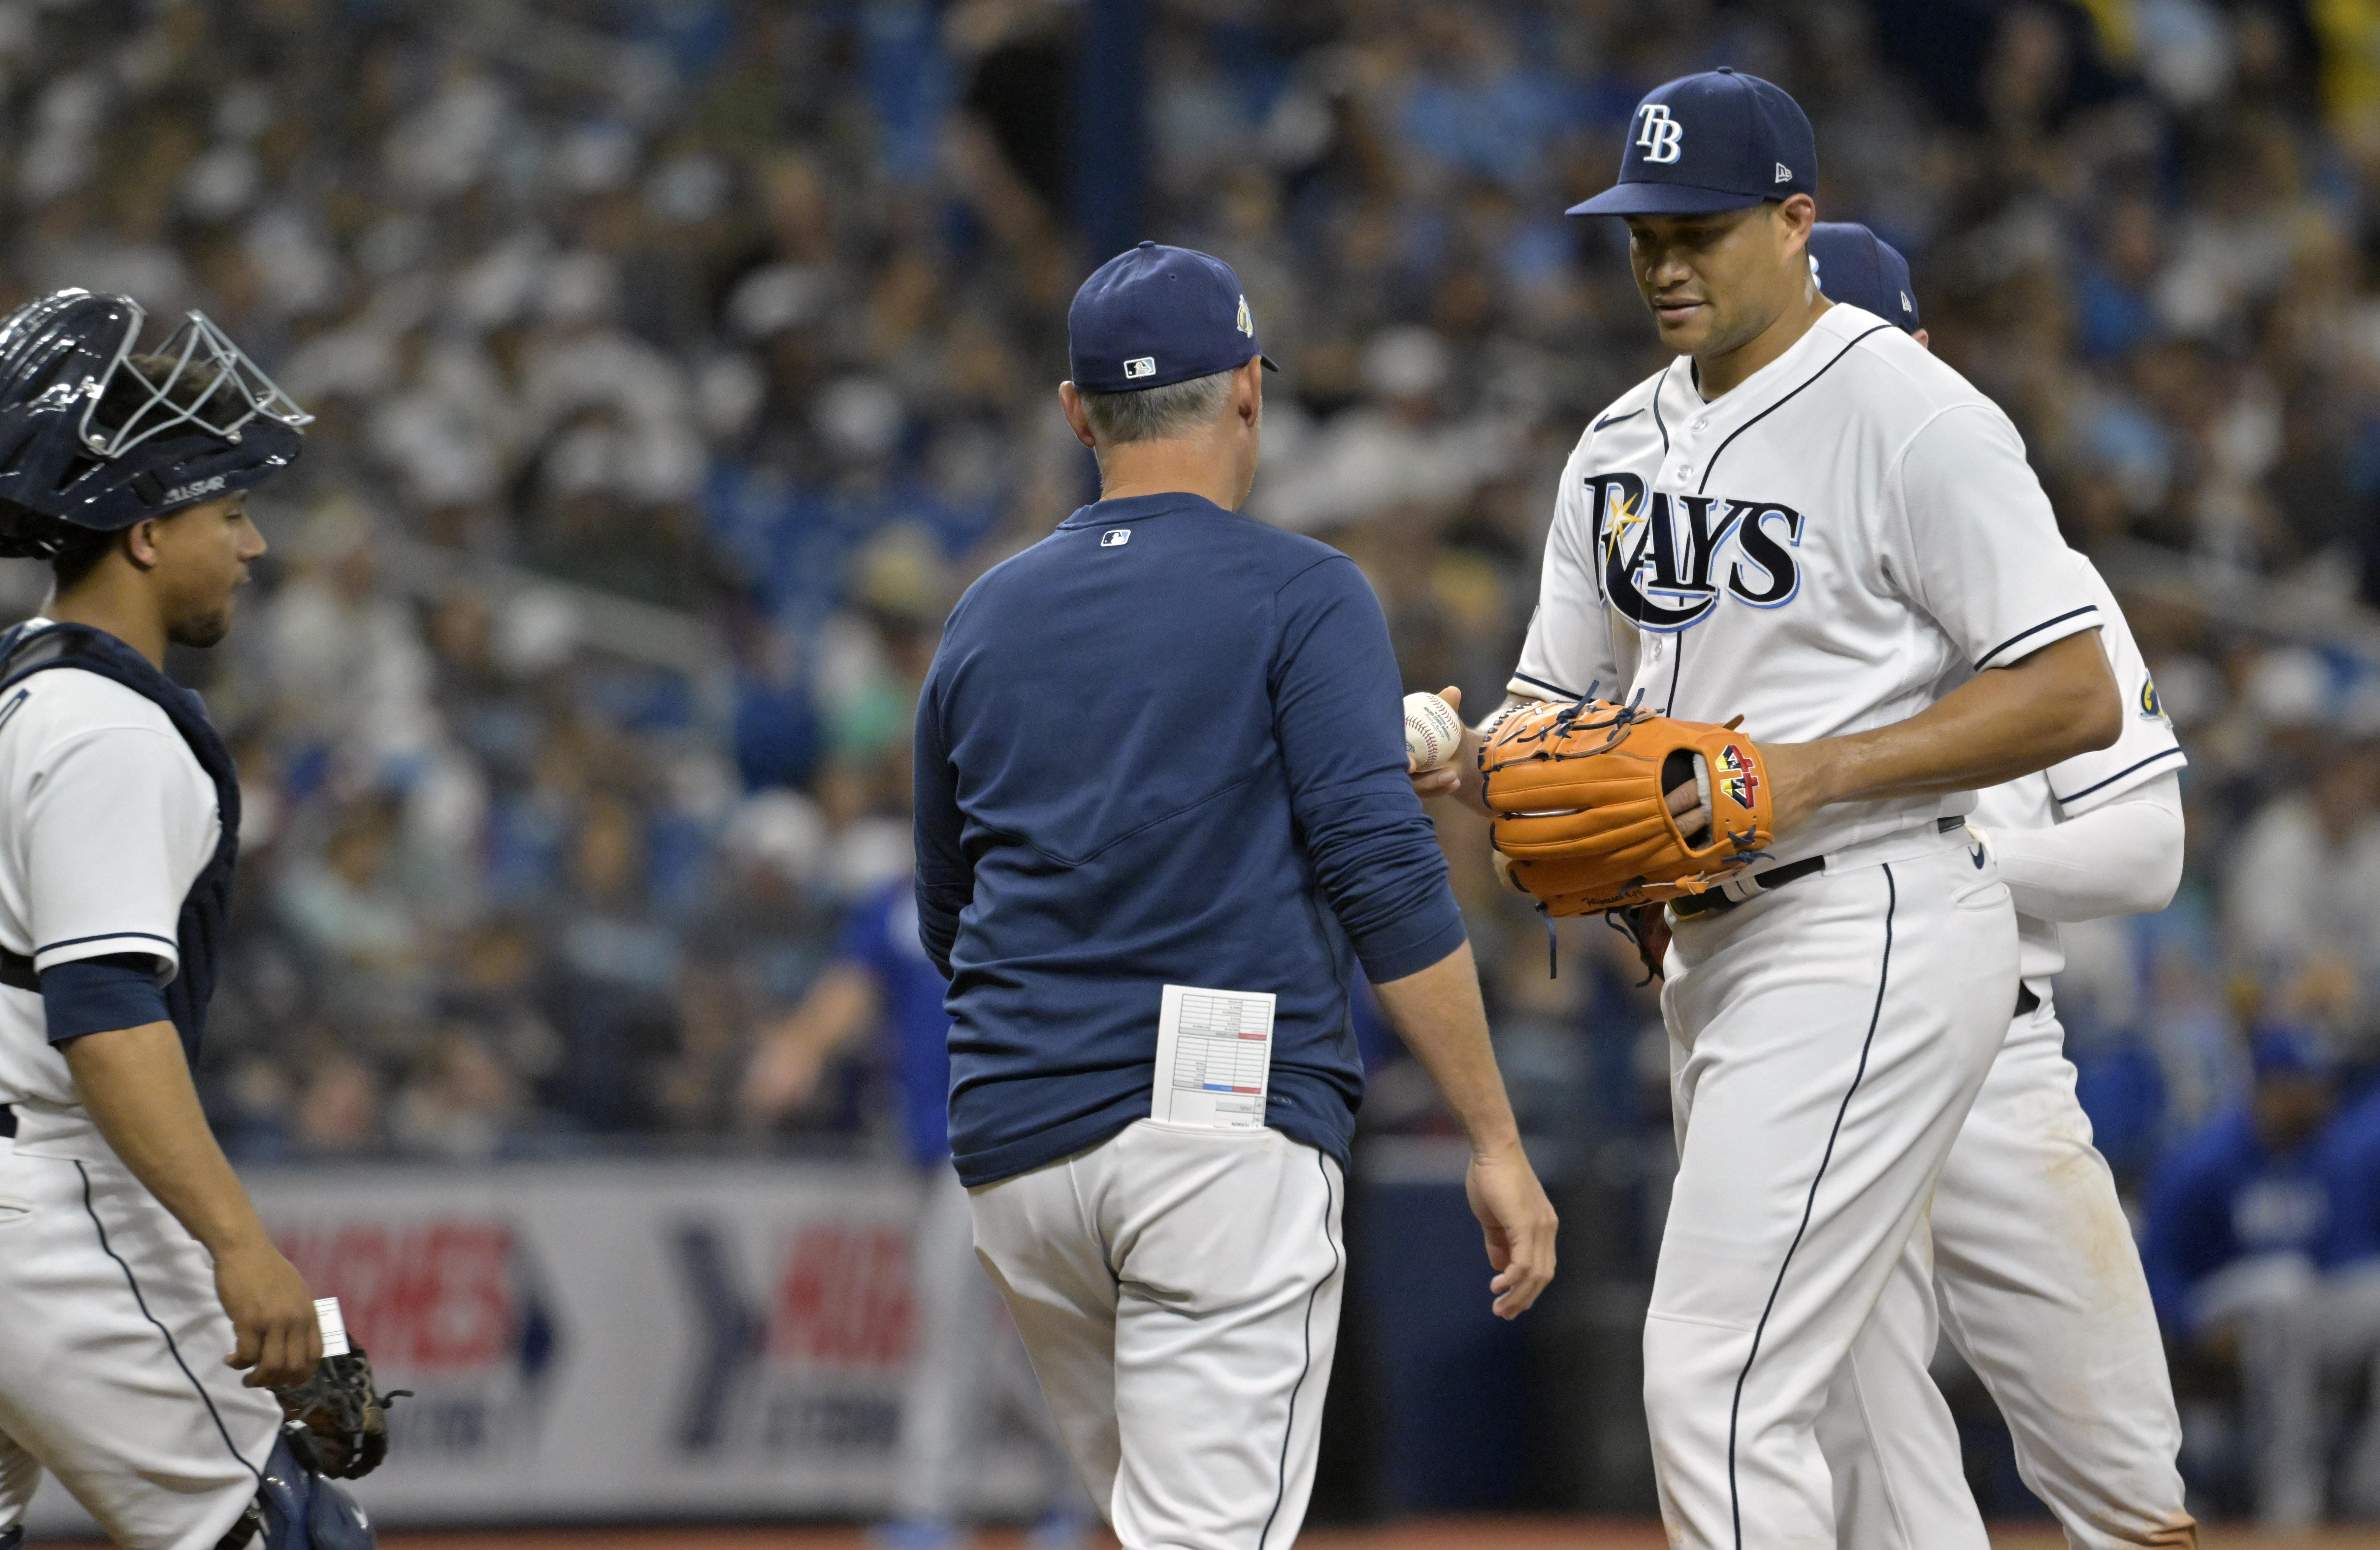 Wander Franco homers in return to Rays after 2-day benching